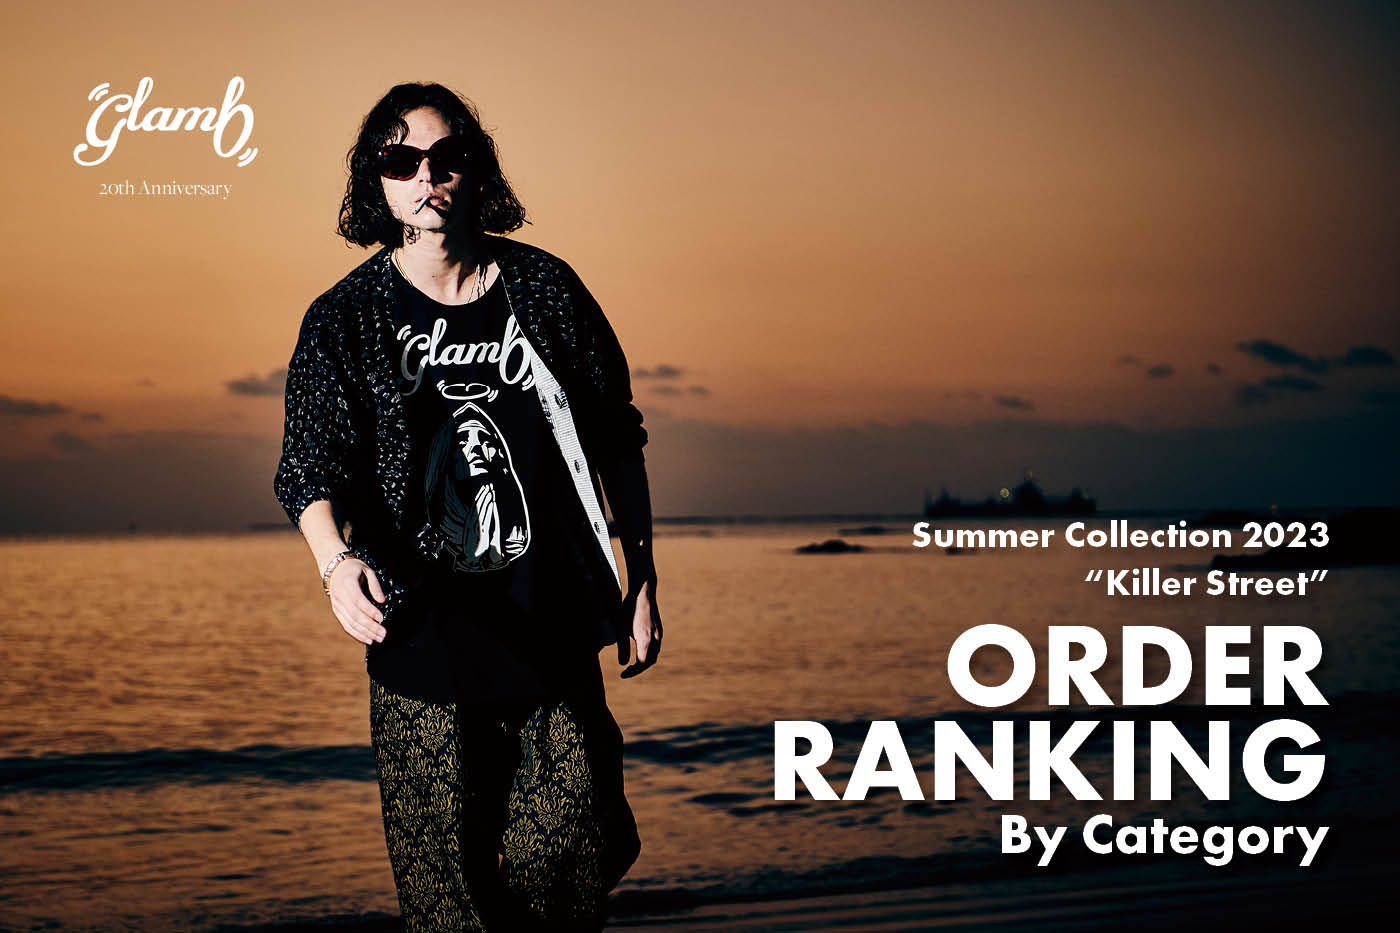 Summer Collection 2023 ORDER RANKING